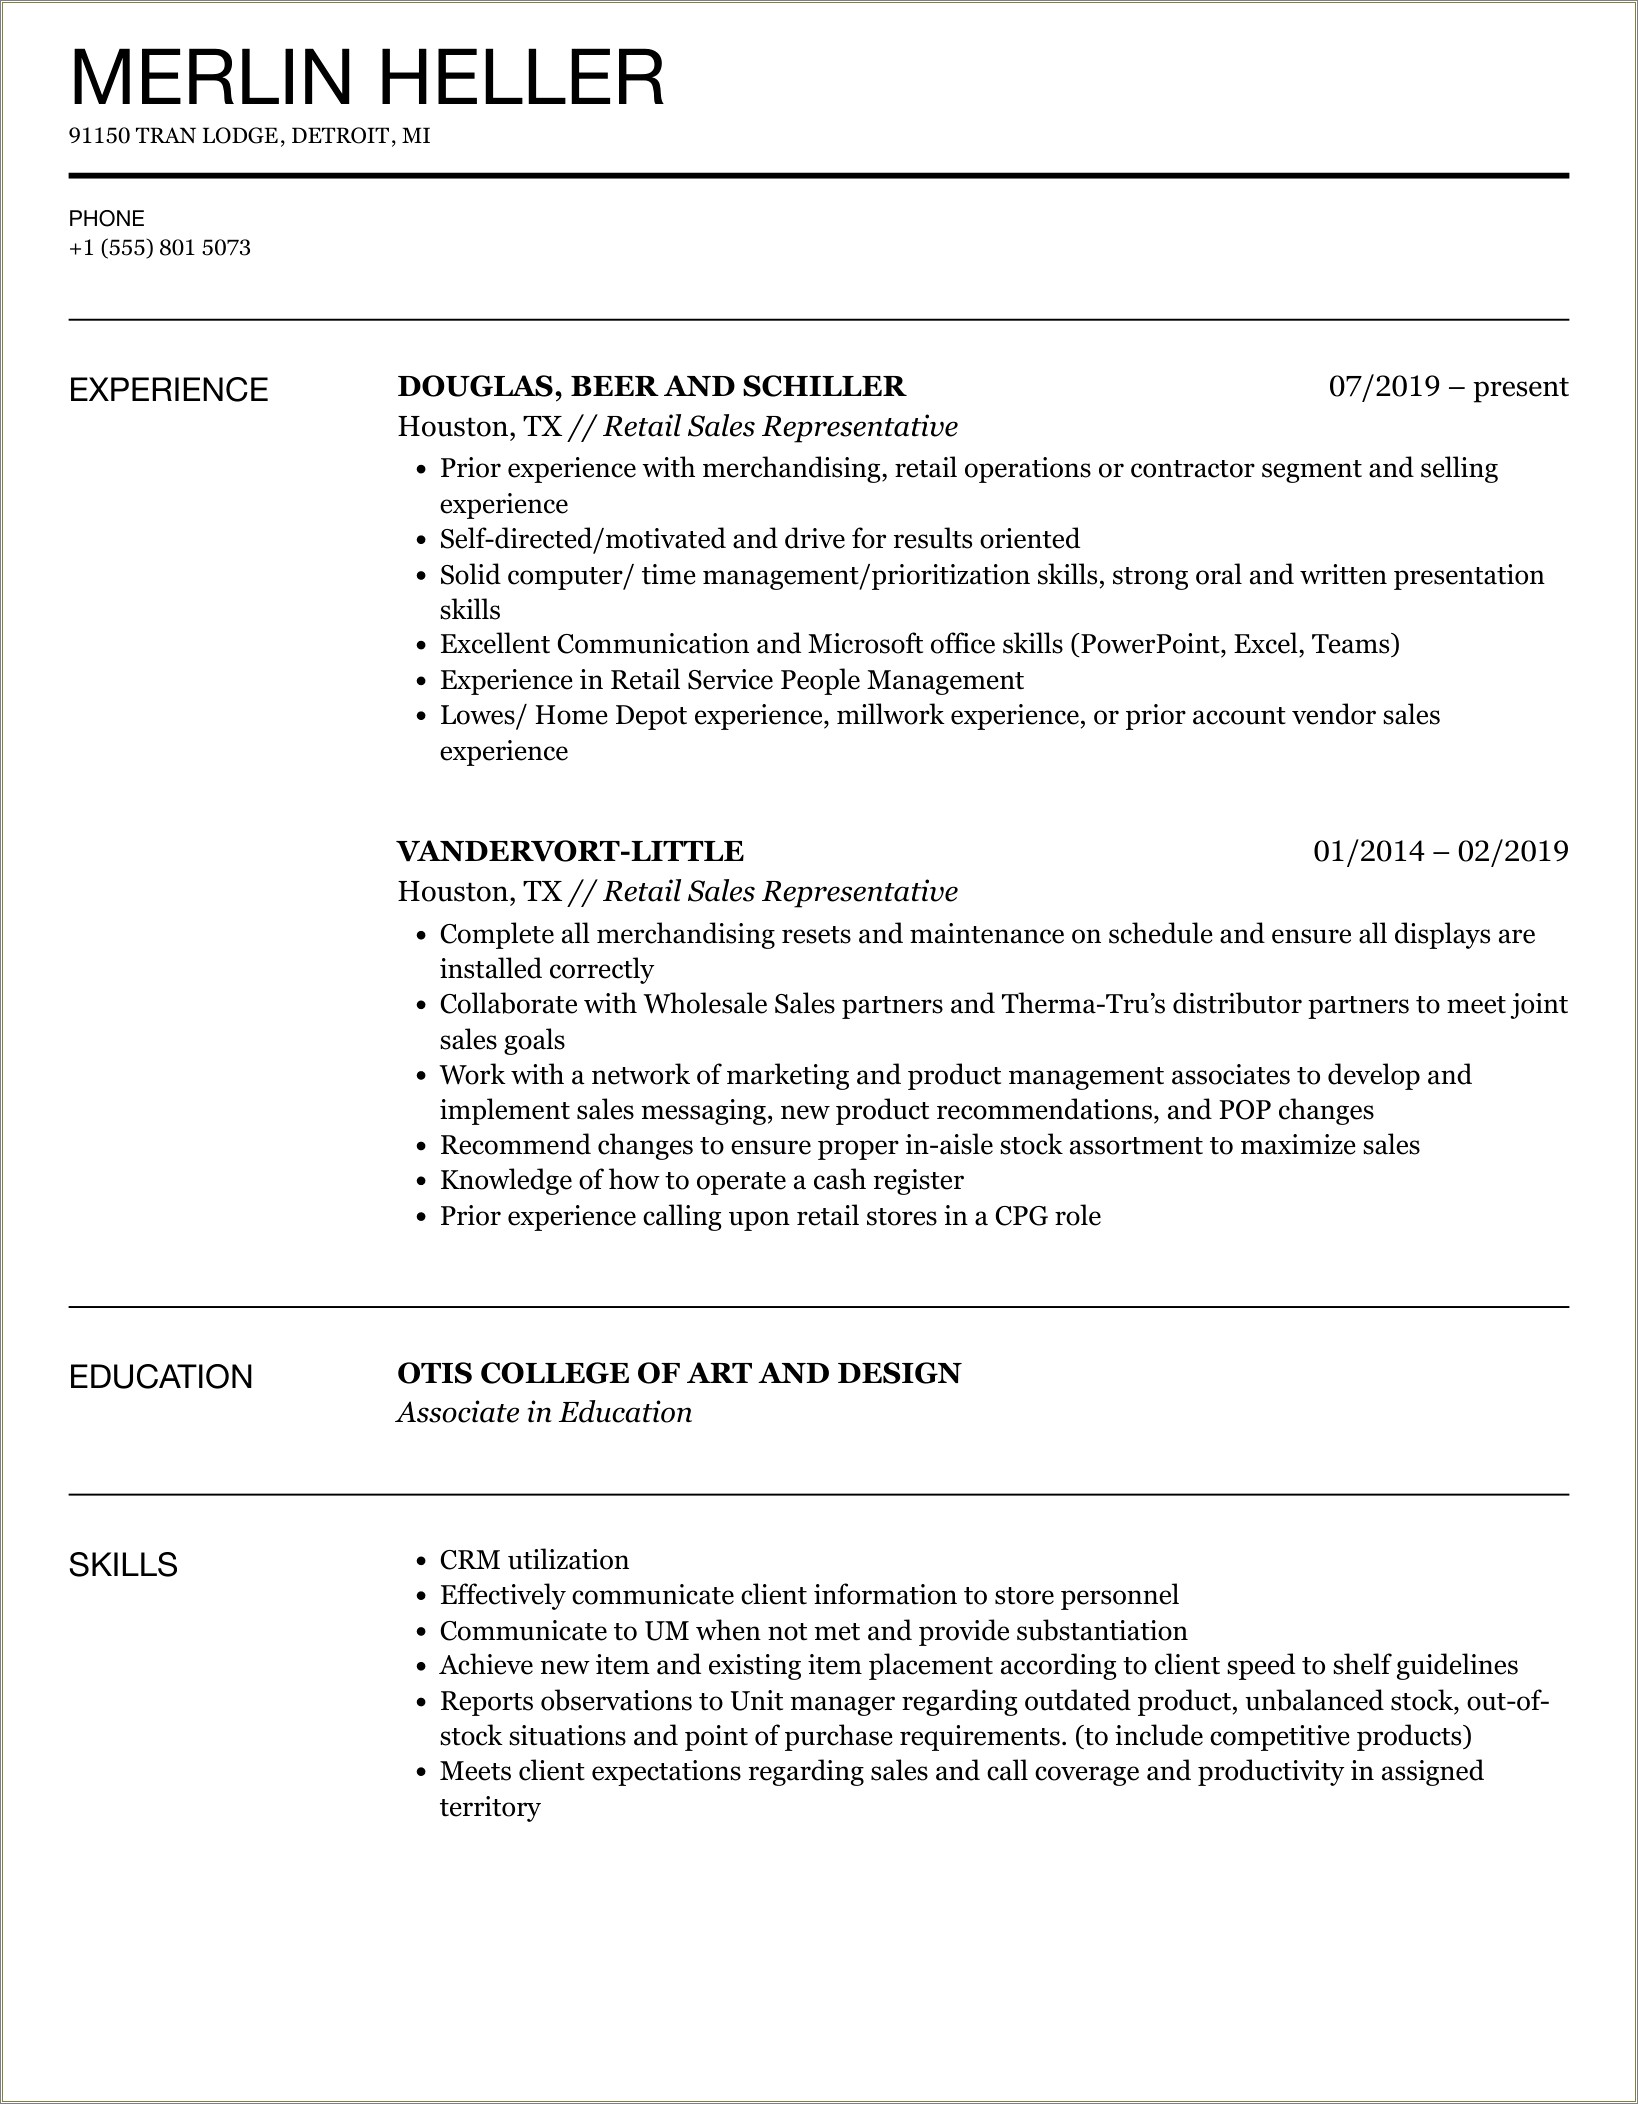 Example Of A Resume For Sales Representative